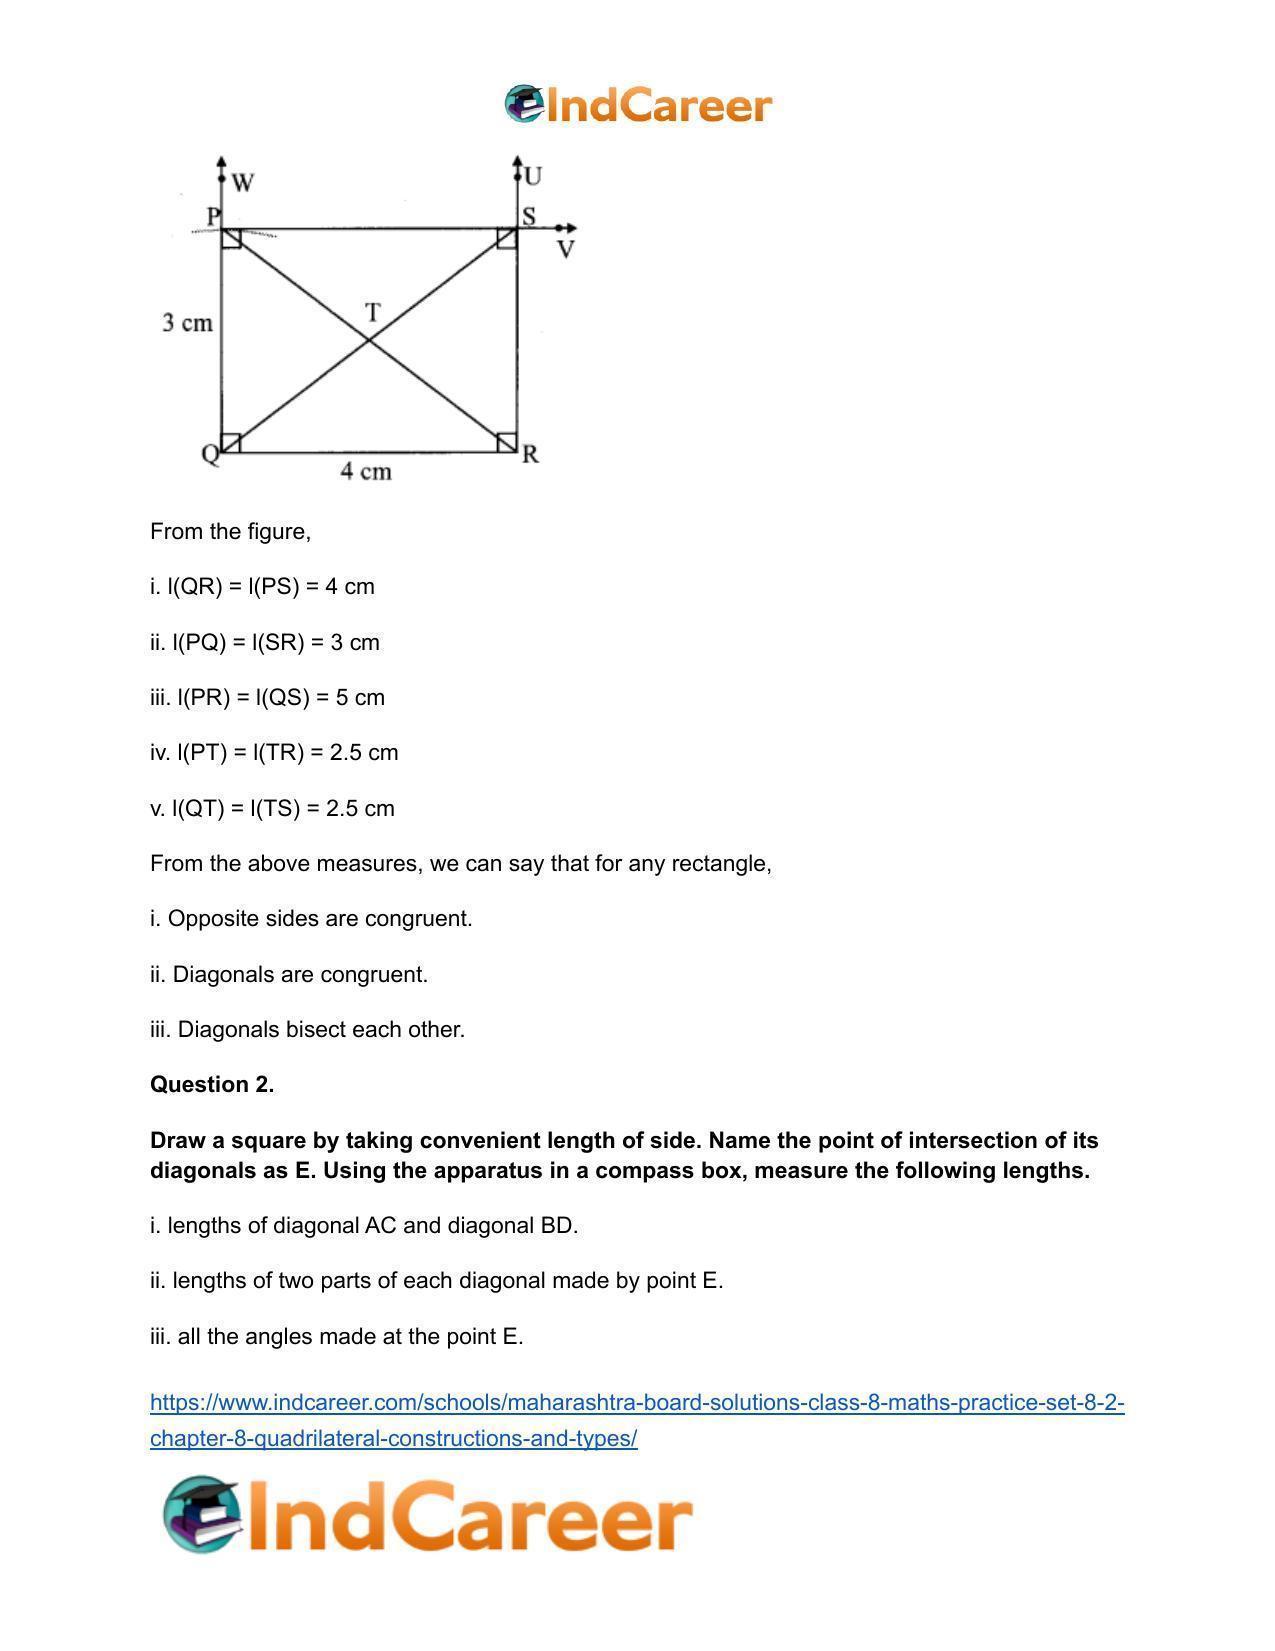 Maharashtra Board Solutions Class 8-Maths (Practice Set 8.2): Chapter 8- Quadrilateral: Constructions and Types - Page 12